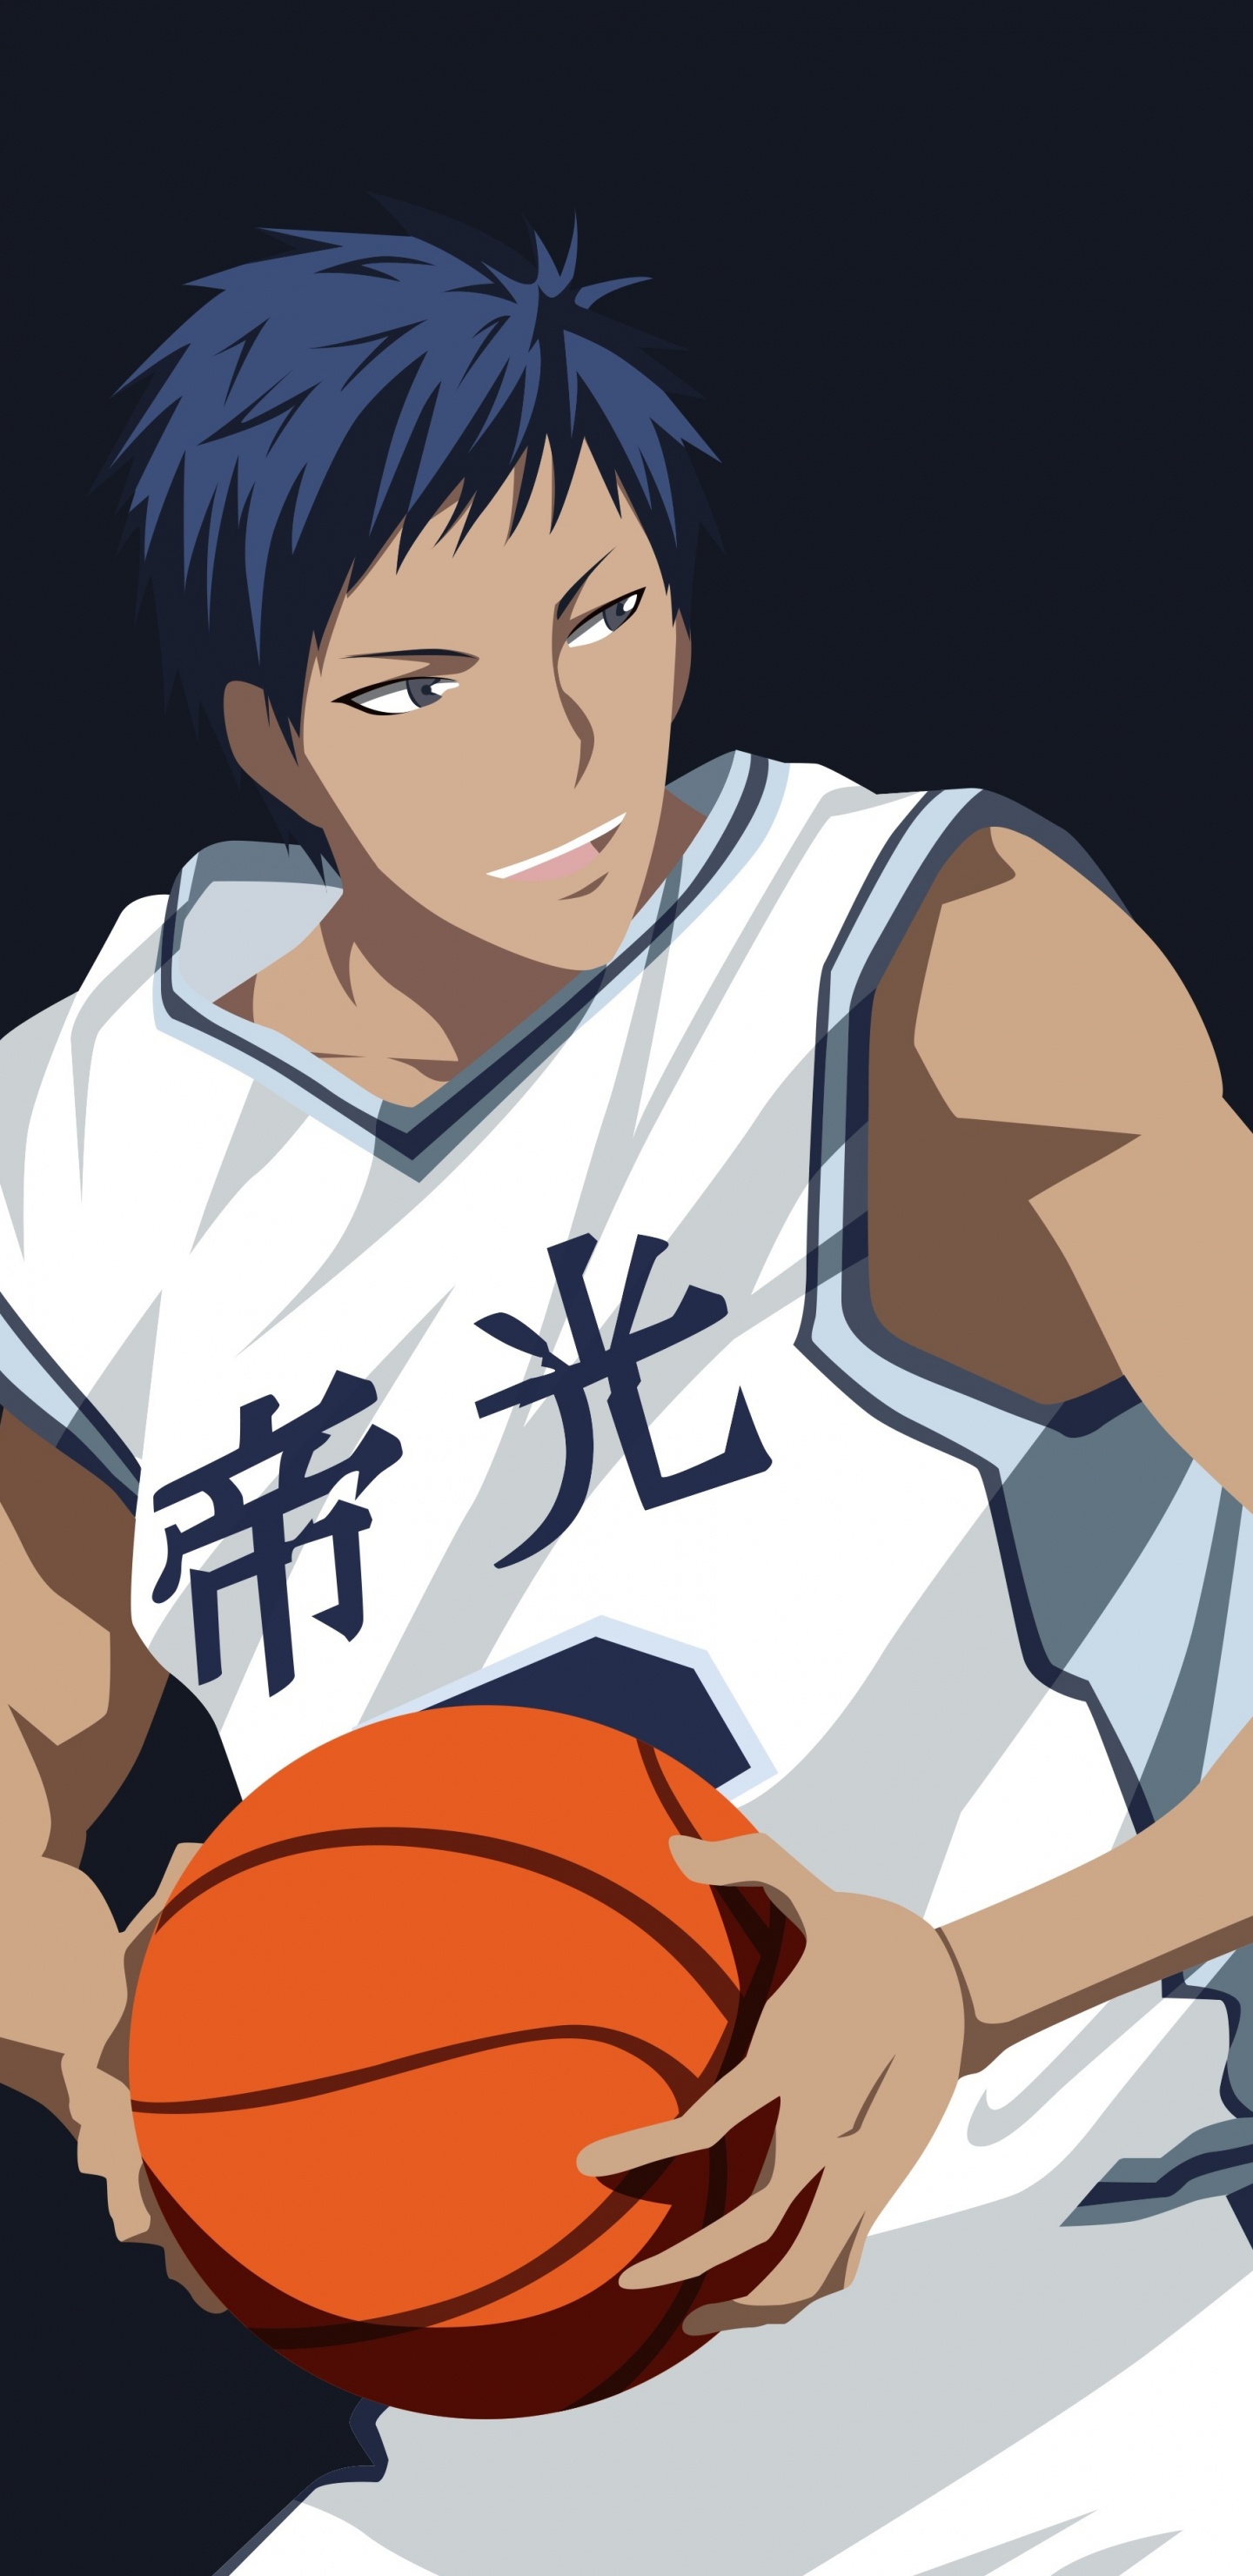 Personnage D'anime Masculin Aux Cheveux Noirs Tenant le Basket-ball. Wallpaper in 1440x2960 Resolution